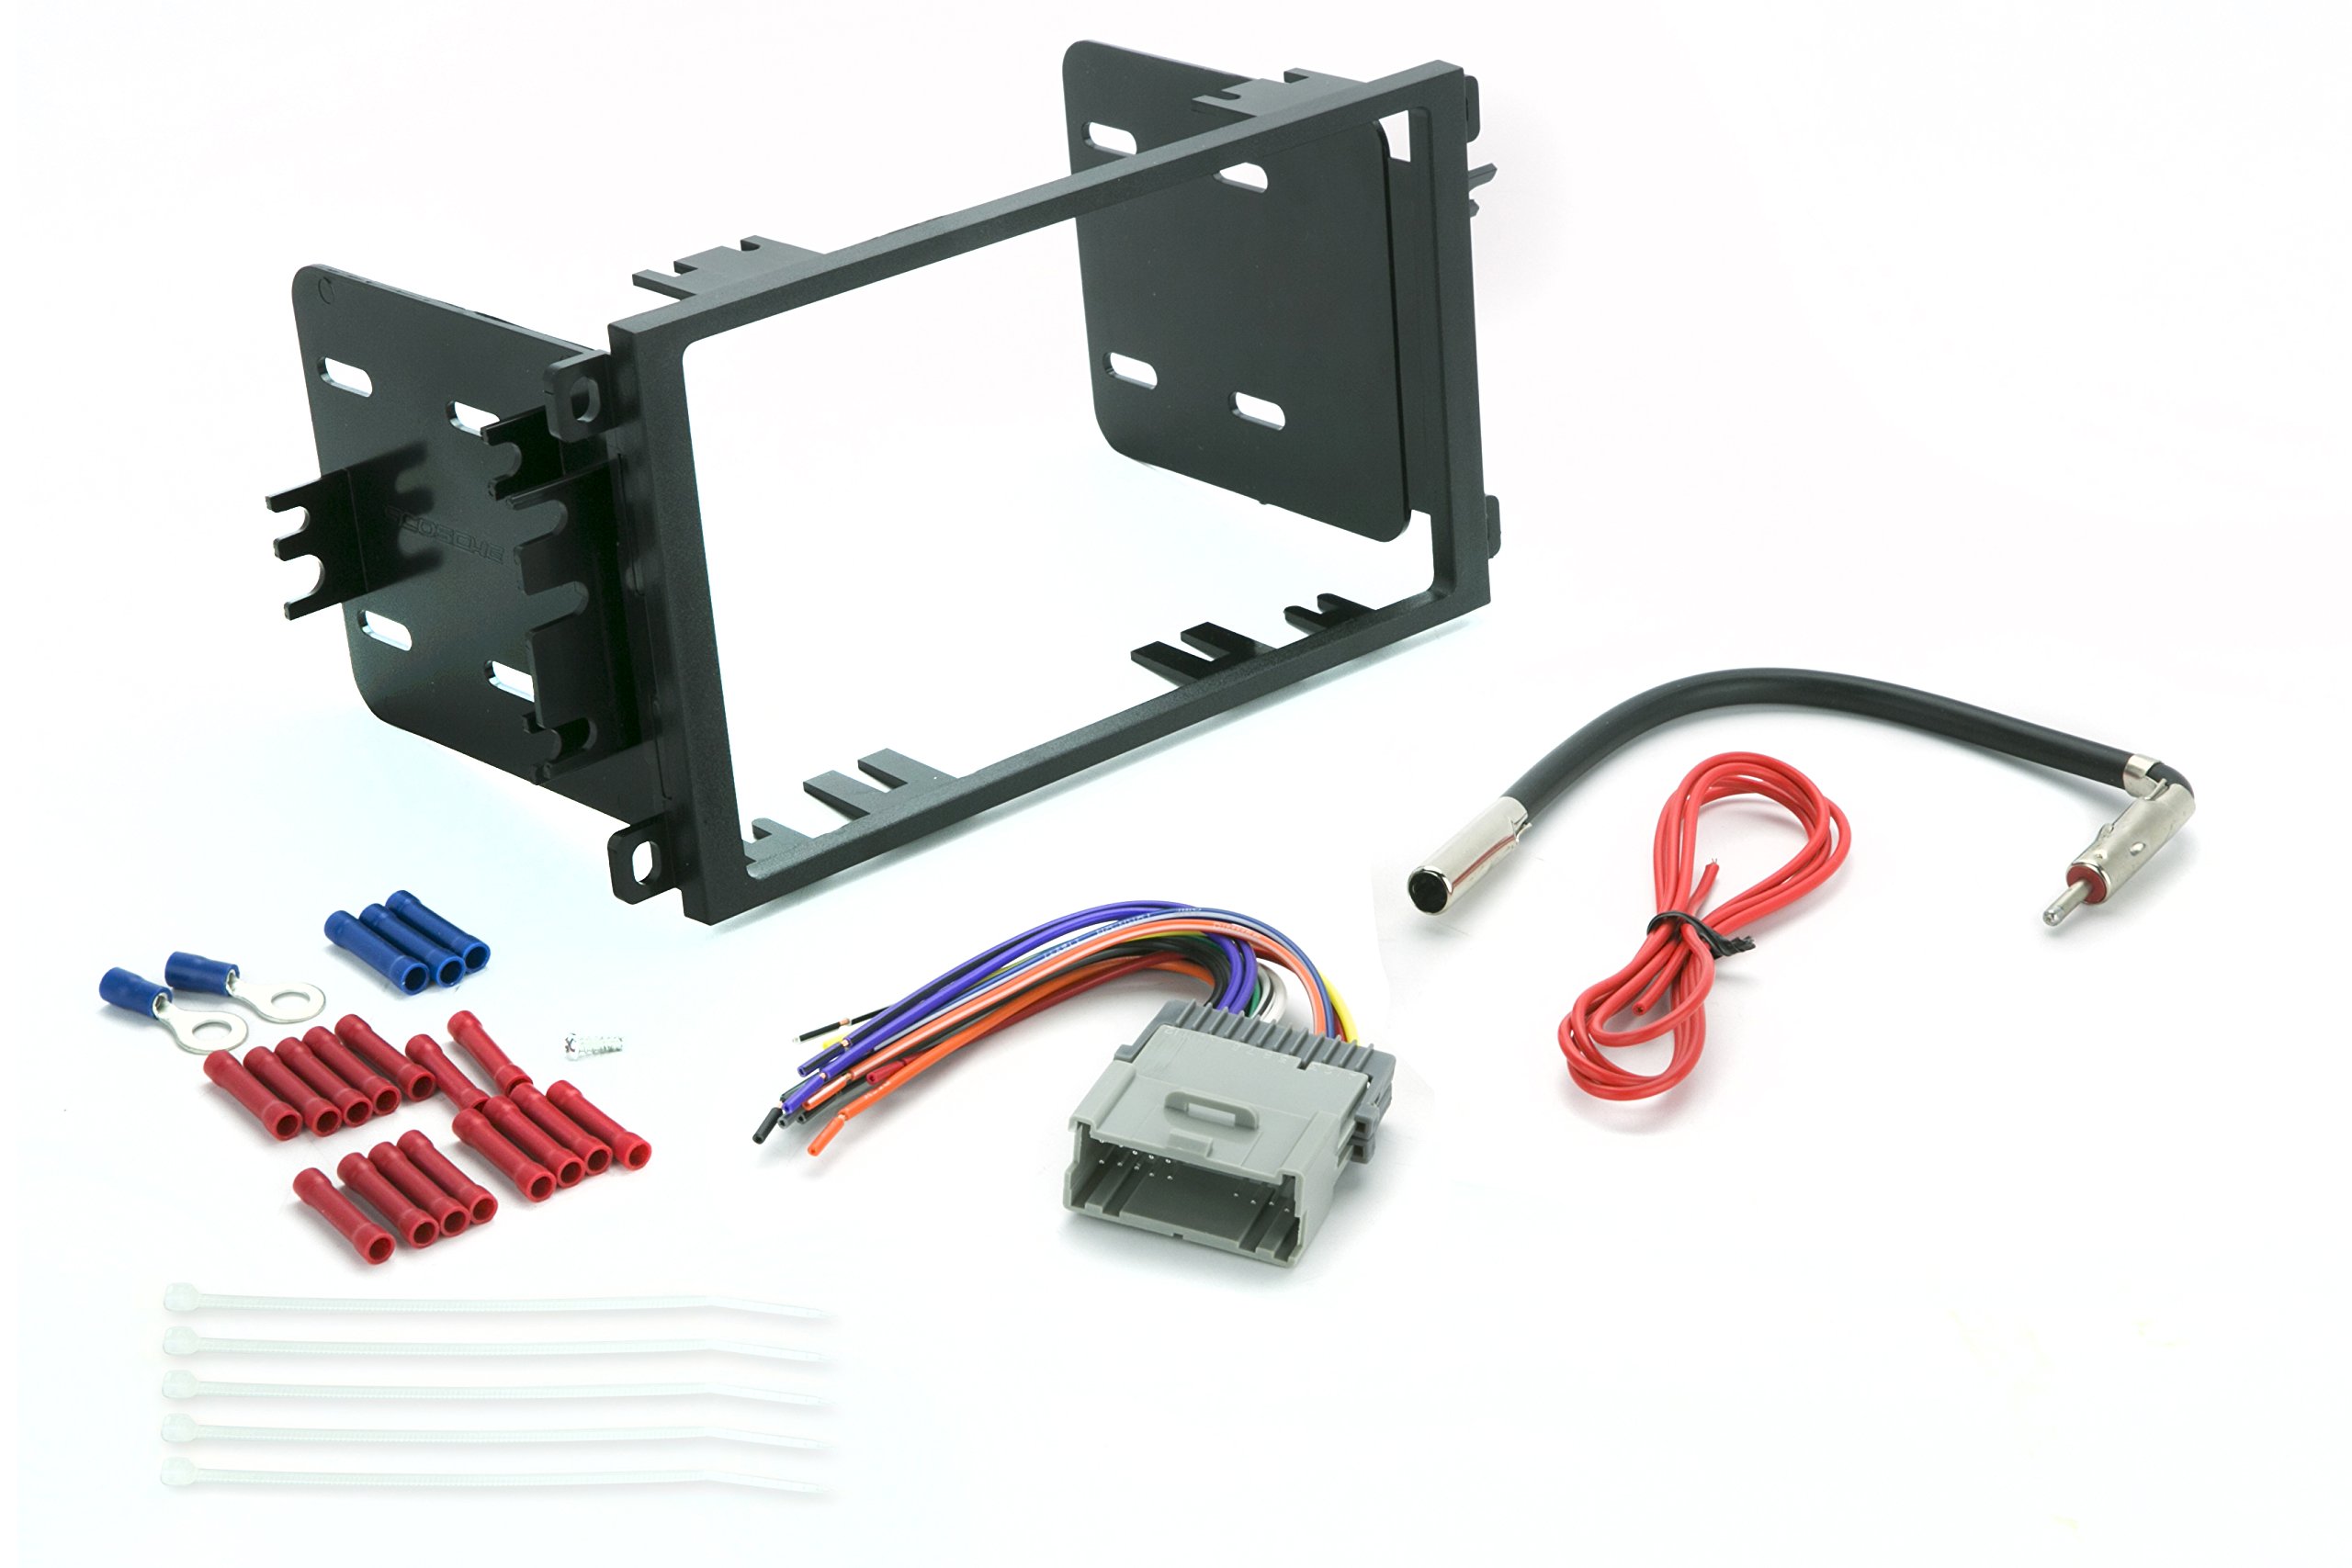 SCOSCHE Install Centric ICGM8BN Double DIN Complete Basic Installation Solution for Installing an Aftermarket Stereo Compatible with Select 2000-13 GM Vehicles,Black